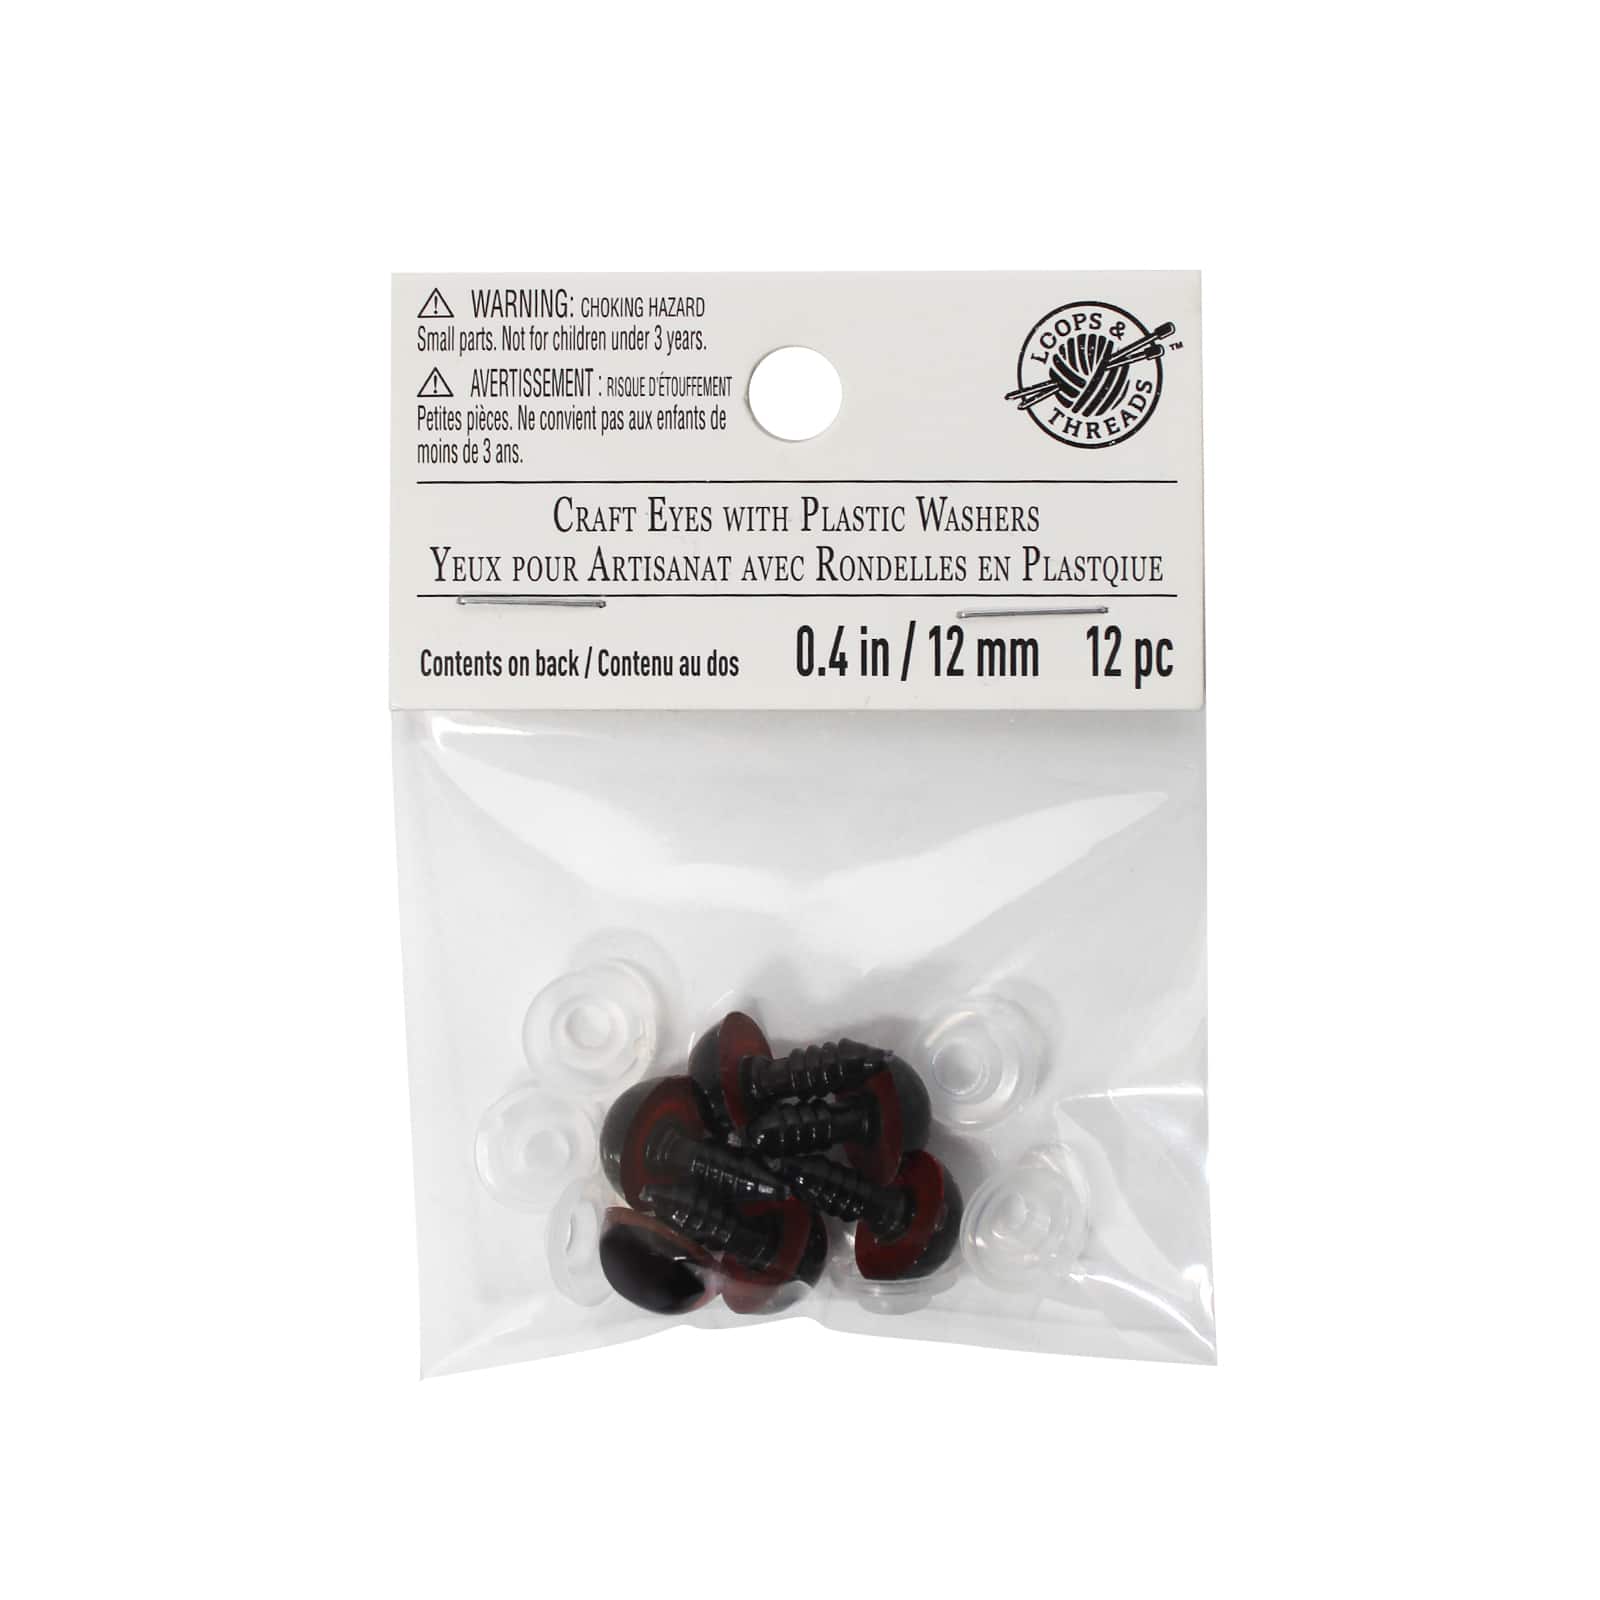 Craft Eyes with Plastic Washers Loops & Threads 12mm | Michaels